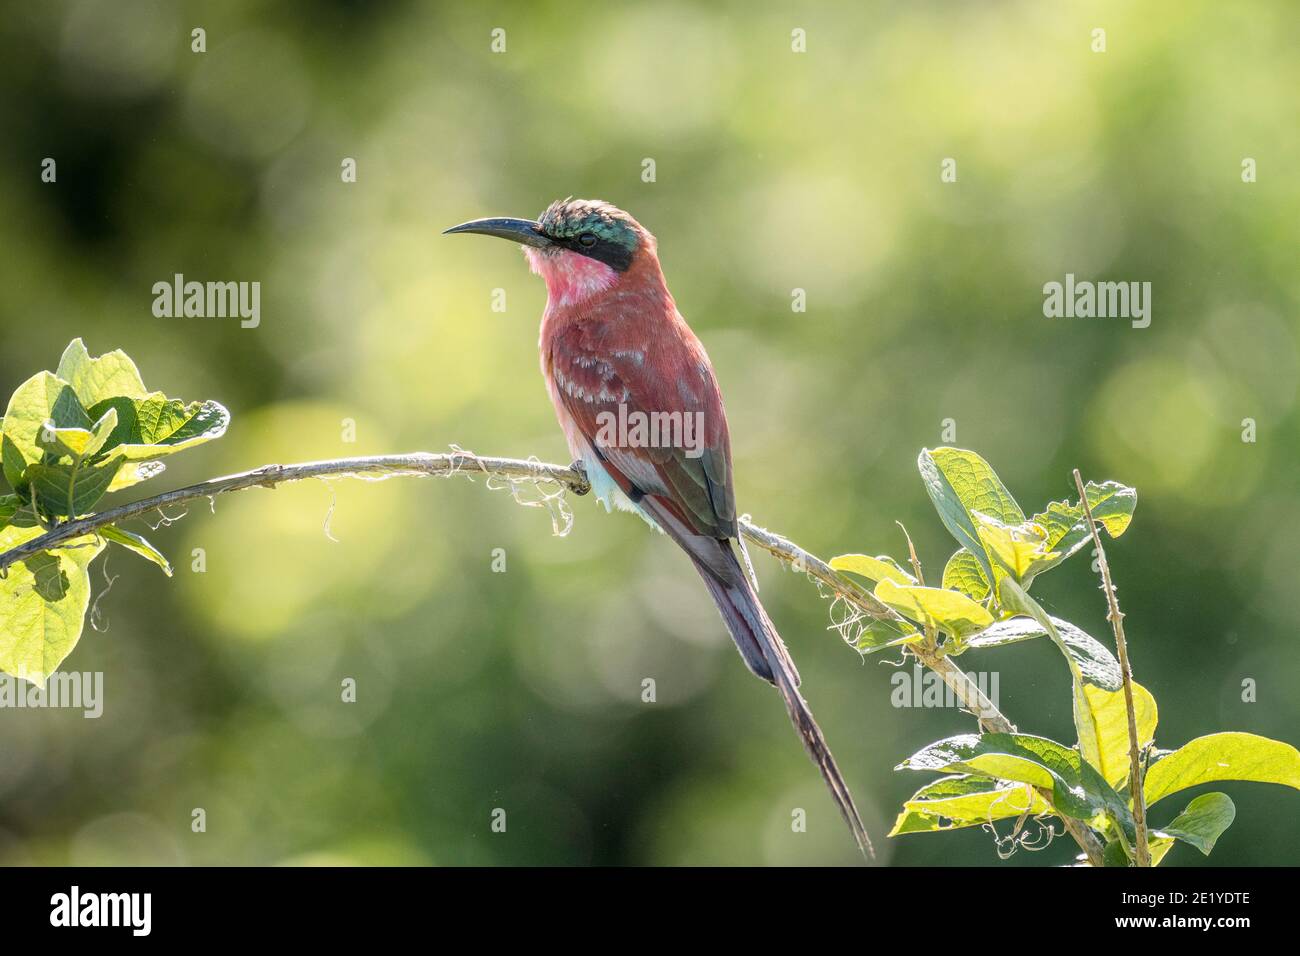 Southern Carmine Bee-Eater (Merops nubicoides) bird with worn plumage / feathers in Chobe National Park, Botswana, Africa. Stock Photo